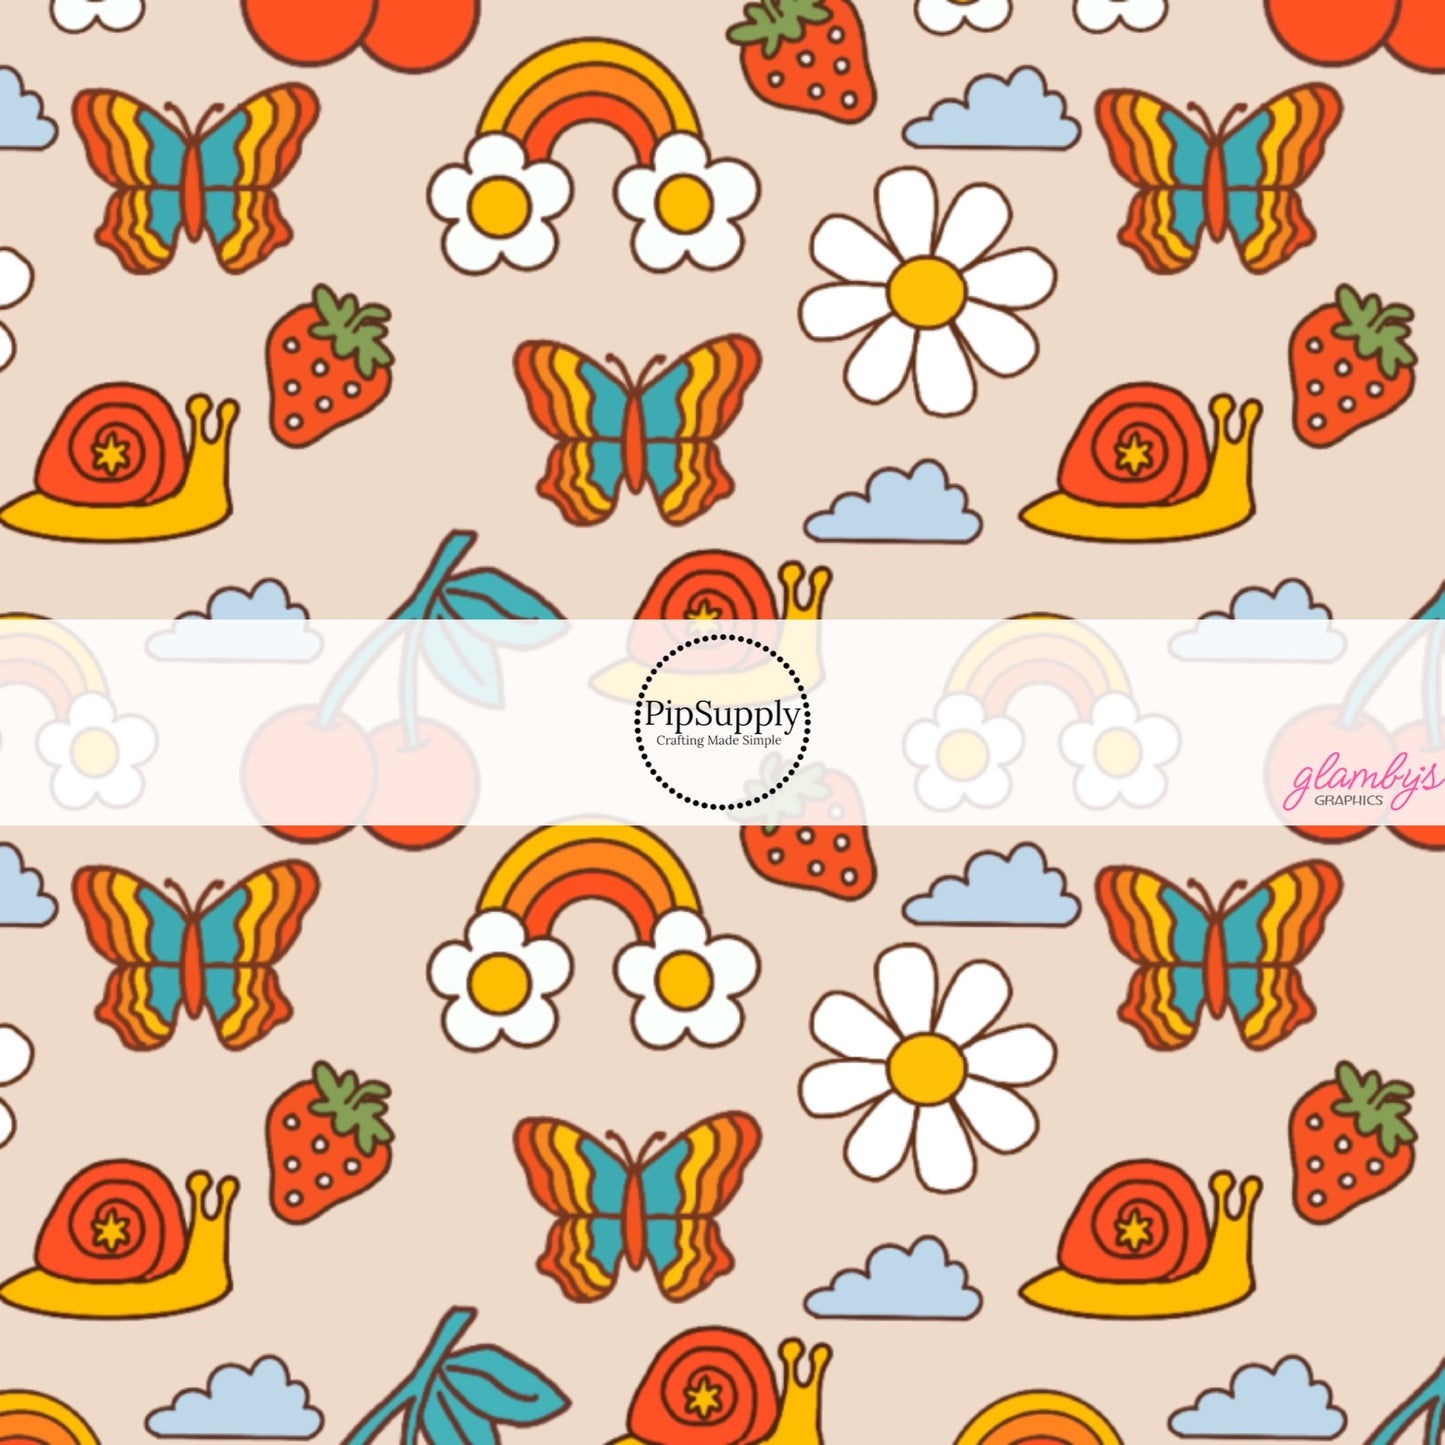 Retro Snails, Clouds, Strawberries, and Daisies on tan Fabric by the Yard.